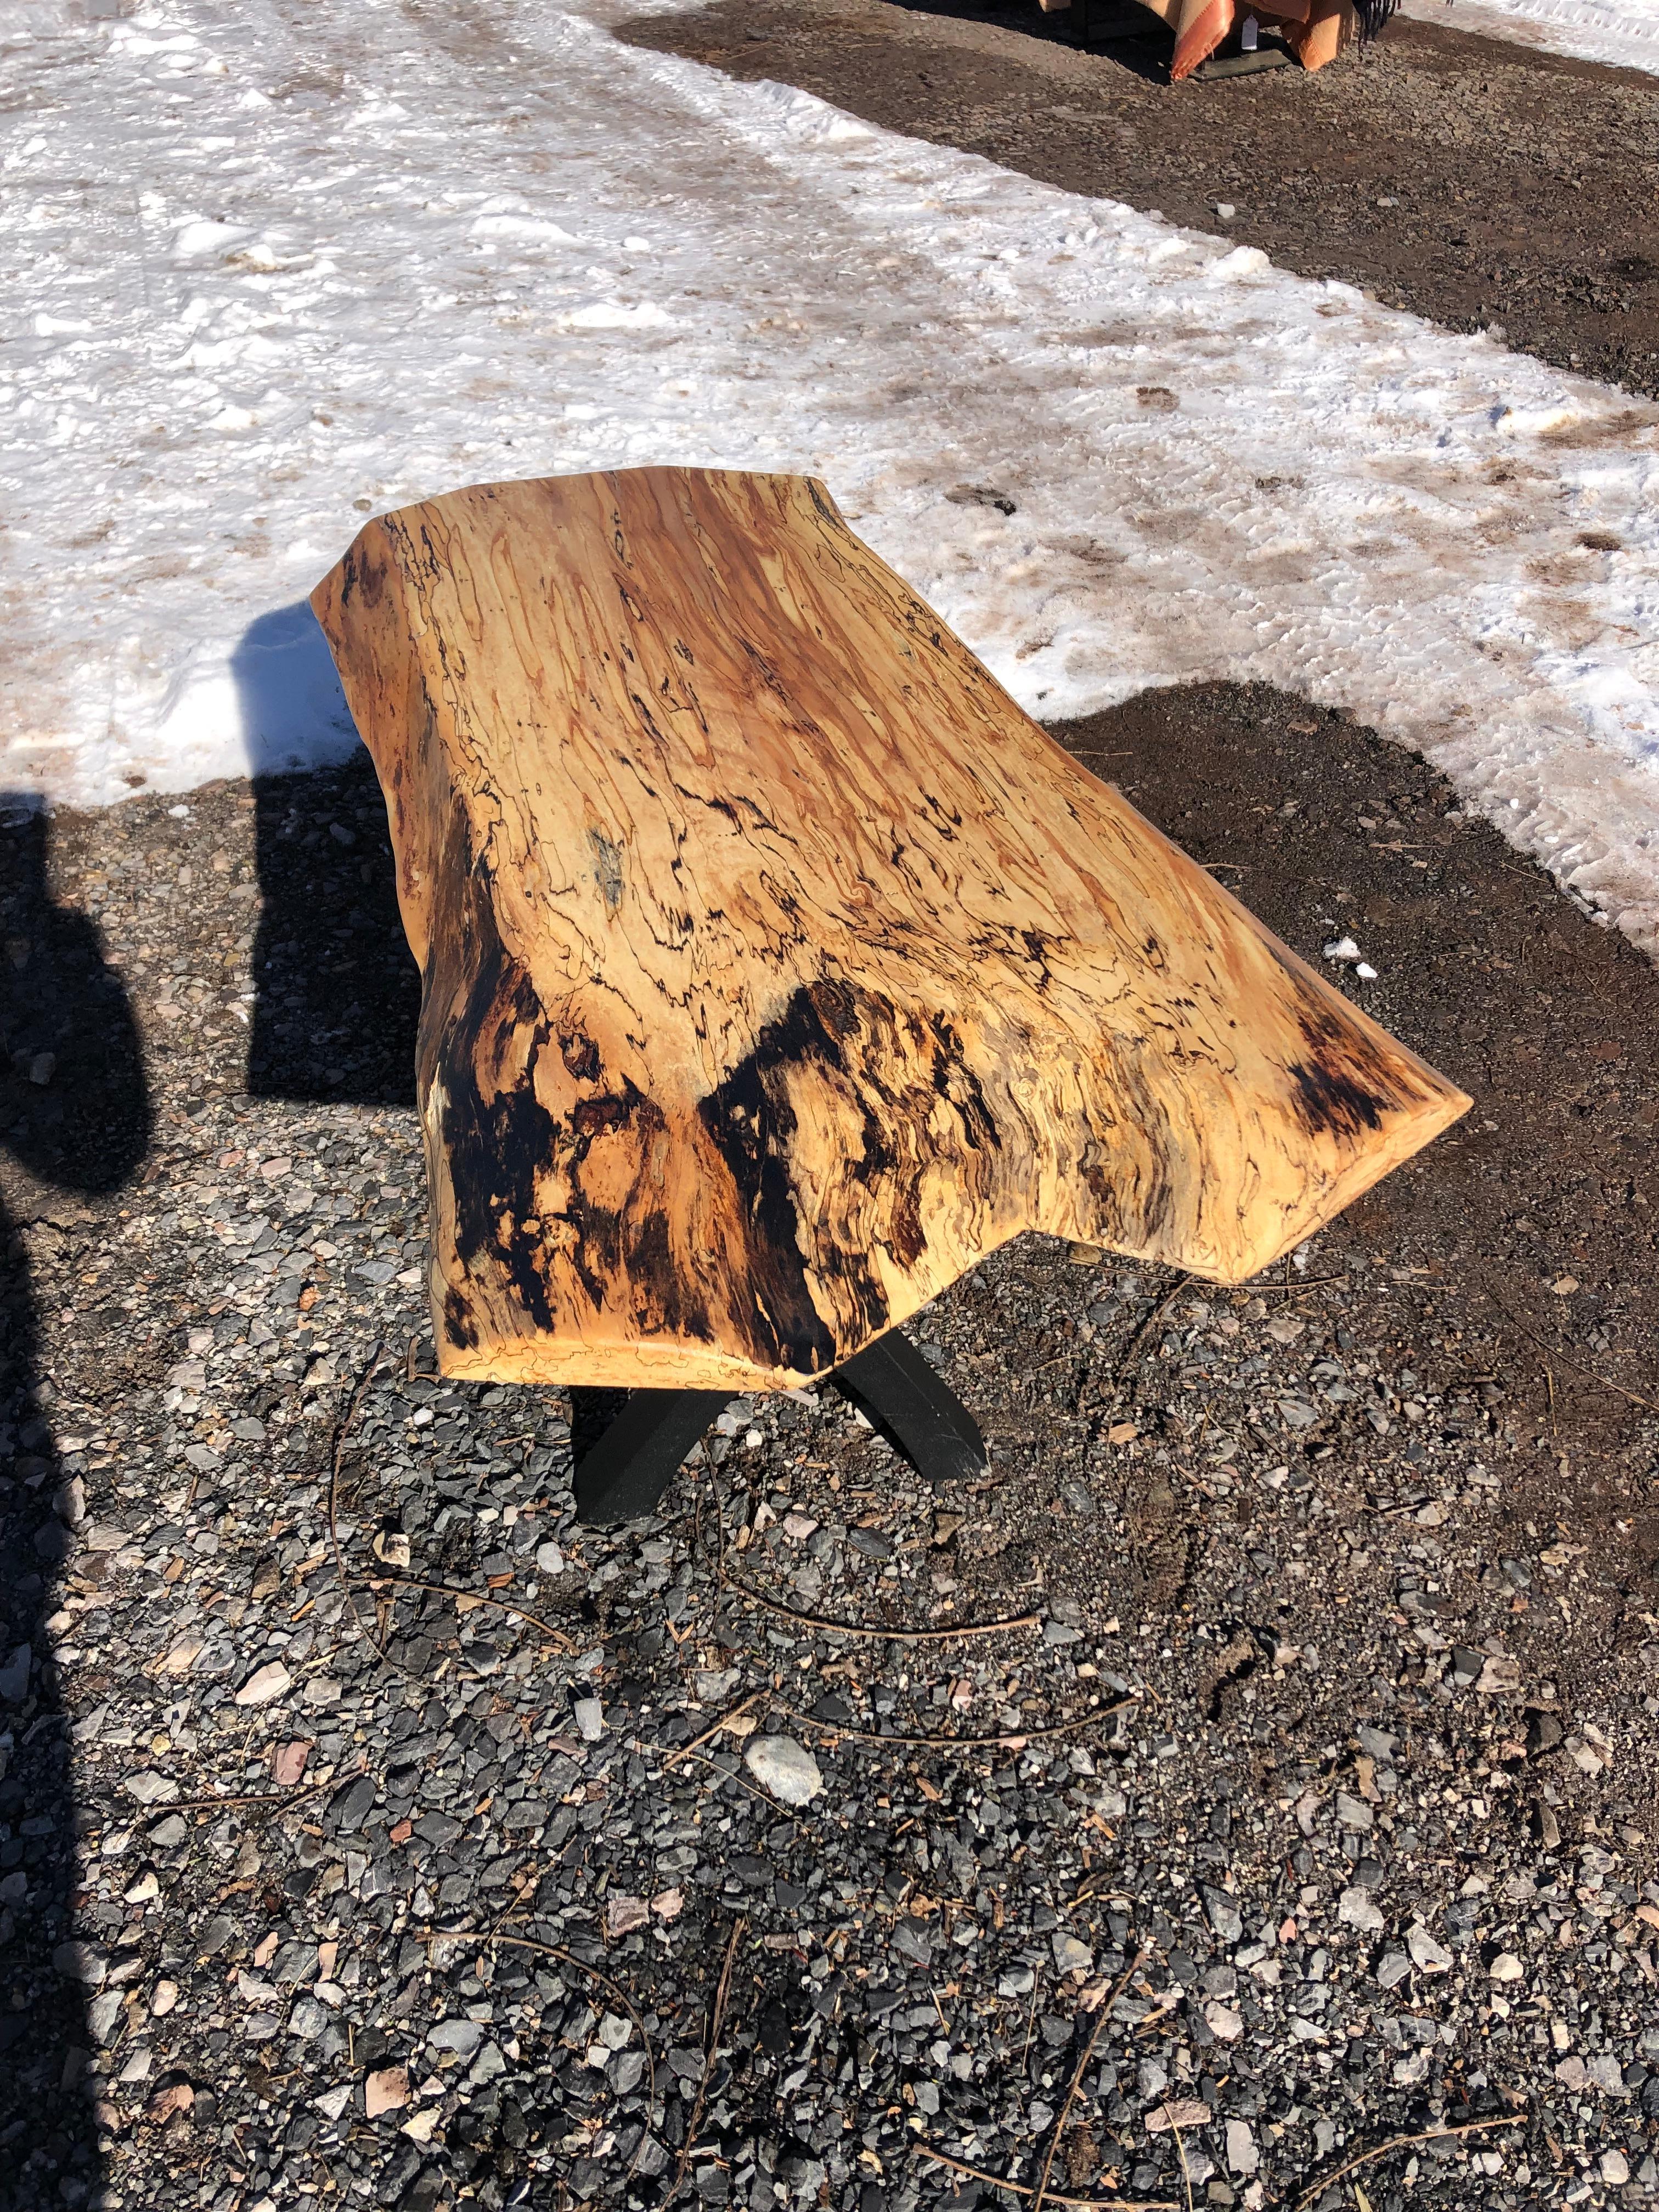 Beautifully handcrafted by an Amish artisan, a one of a kind live edge maple slab coffee table having gorgeous grain and character. The legs are black wrought iron with a X motif.
Depth from front to back varies from 24 to 19.5
Slab is 3